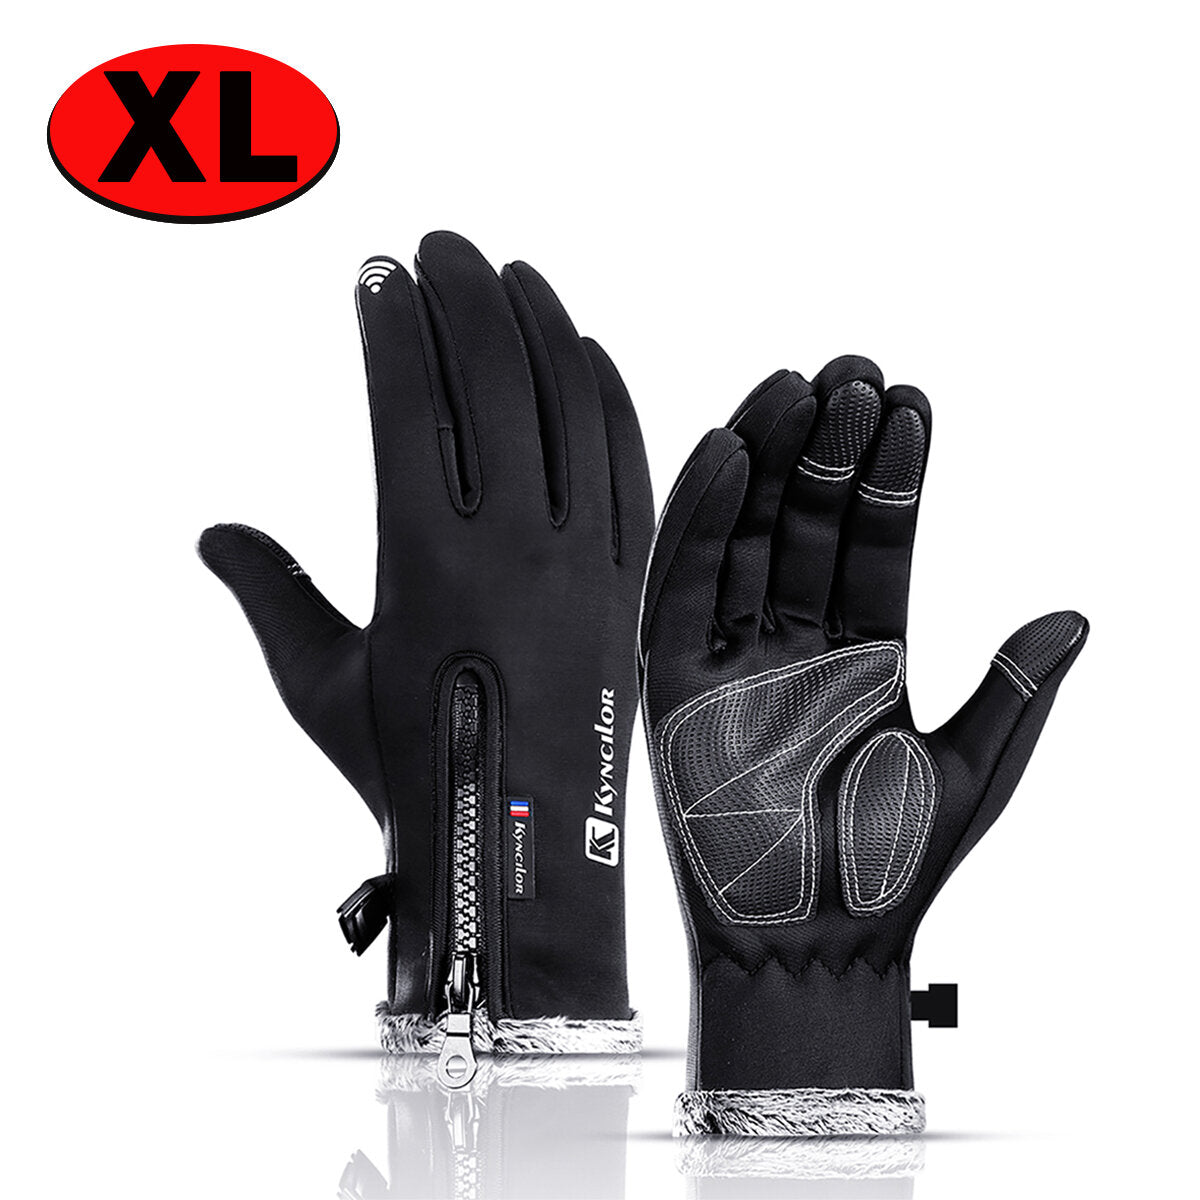 Winter Warm Outdoor Sports Gloves Fleece Windproof Non-slip Touch Screen Ski Riding Motorcycle Gloves Skiing Gloves